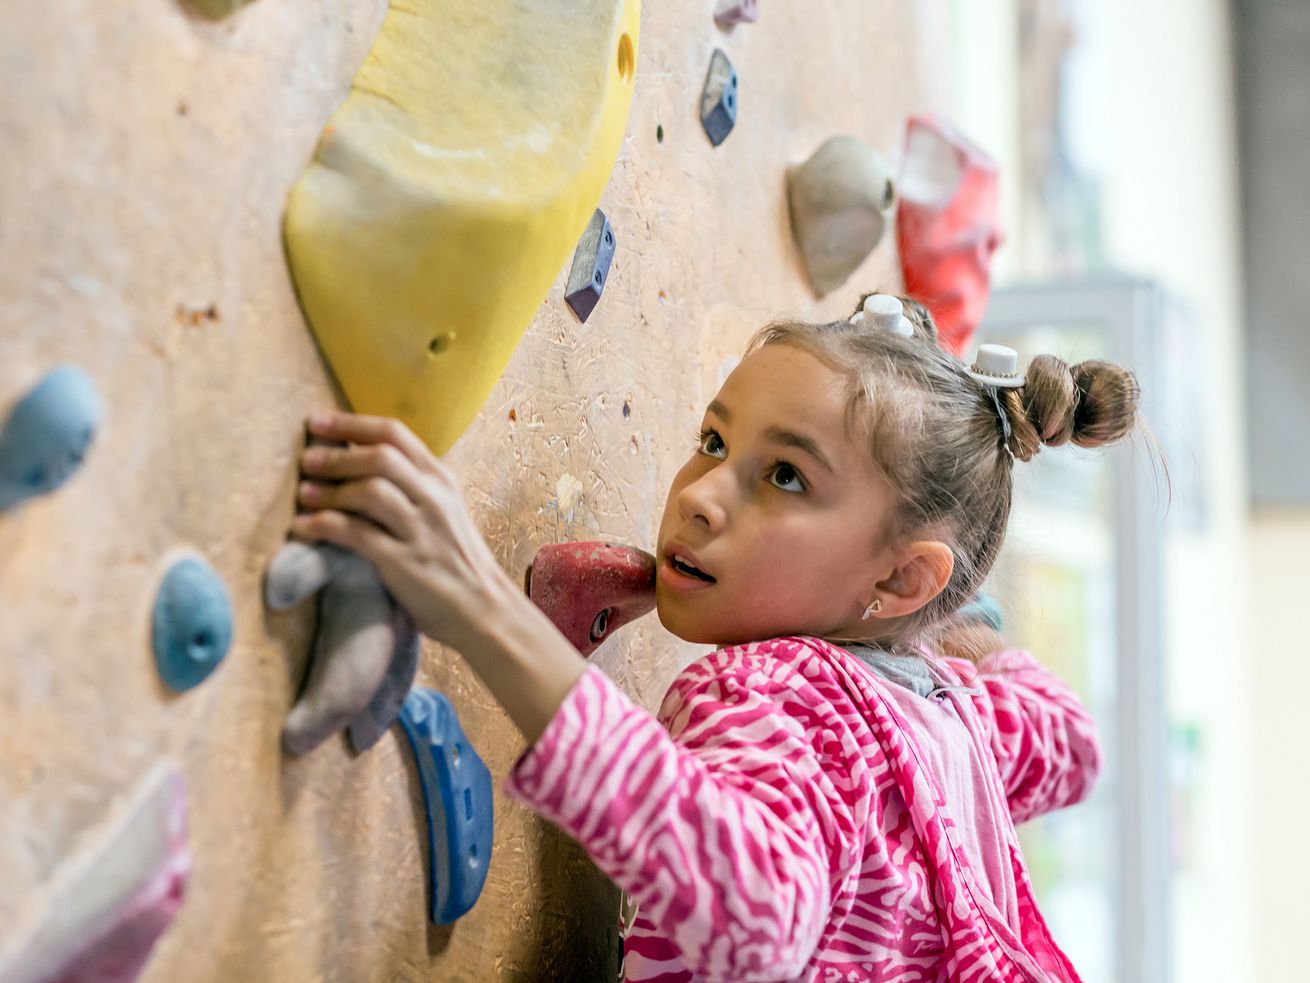 A young girl using a low climbing wall